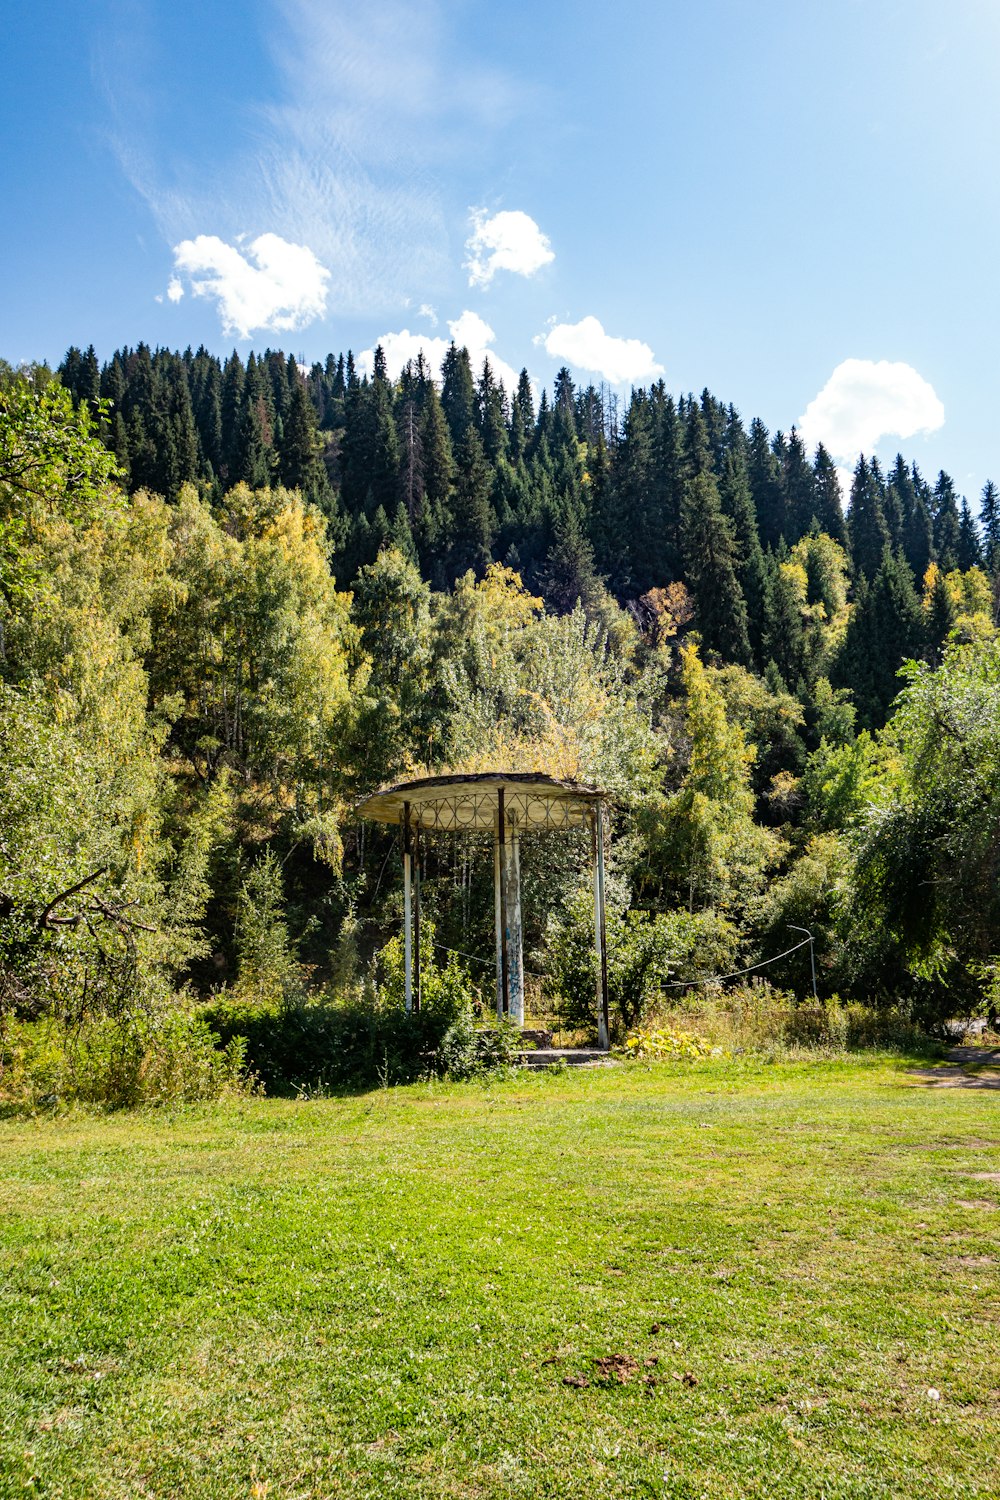 a gazebo in the middle of a field with trees in the background